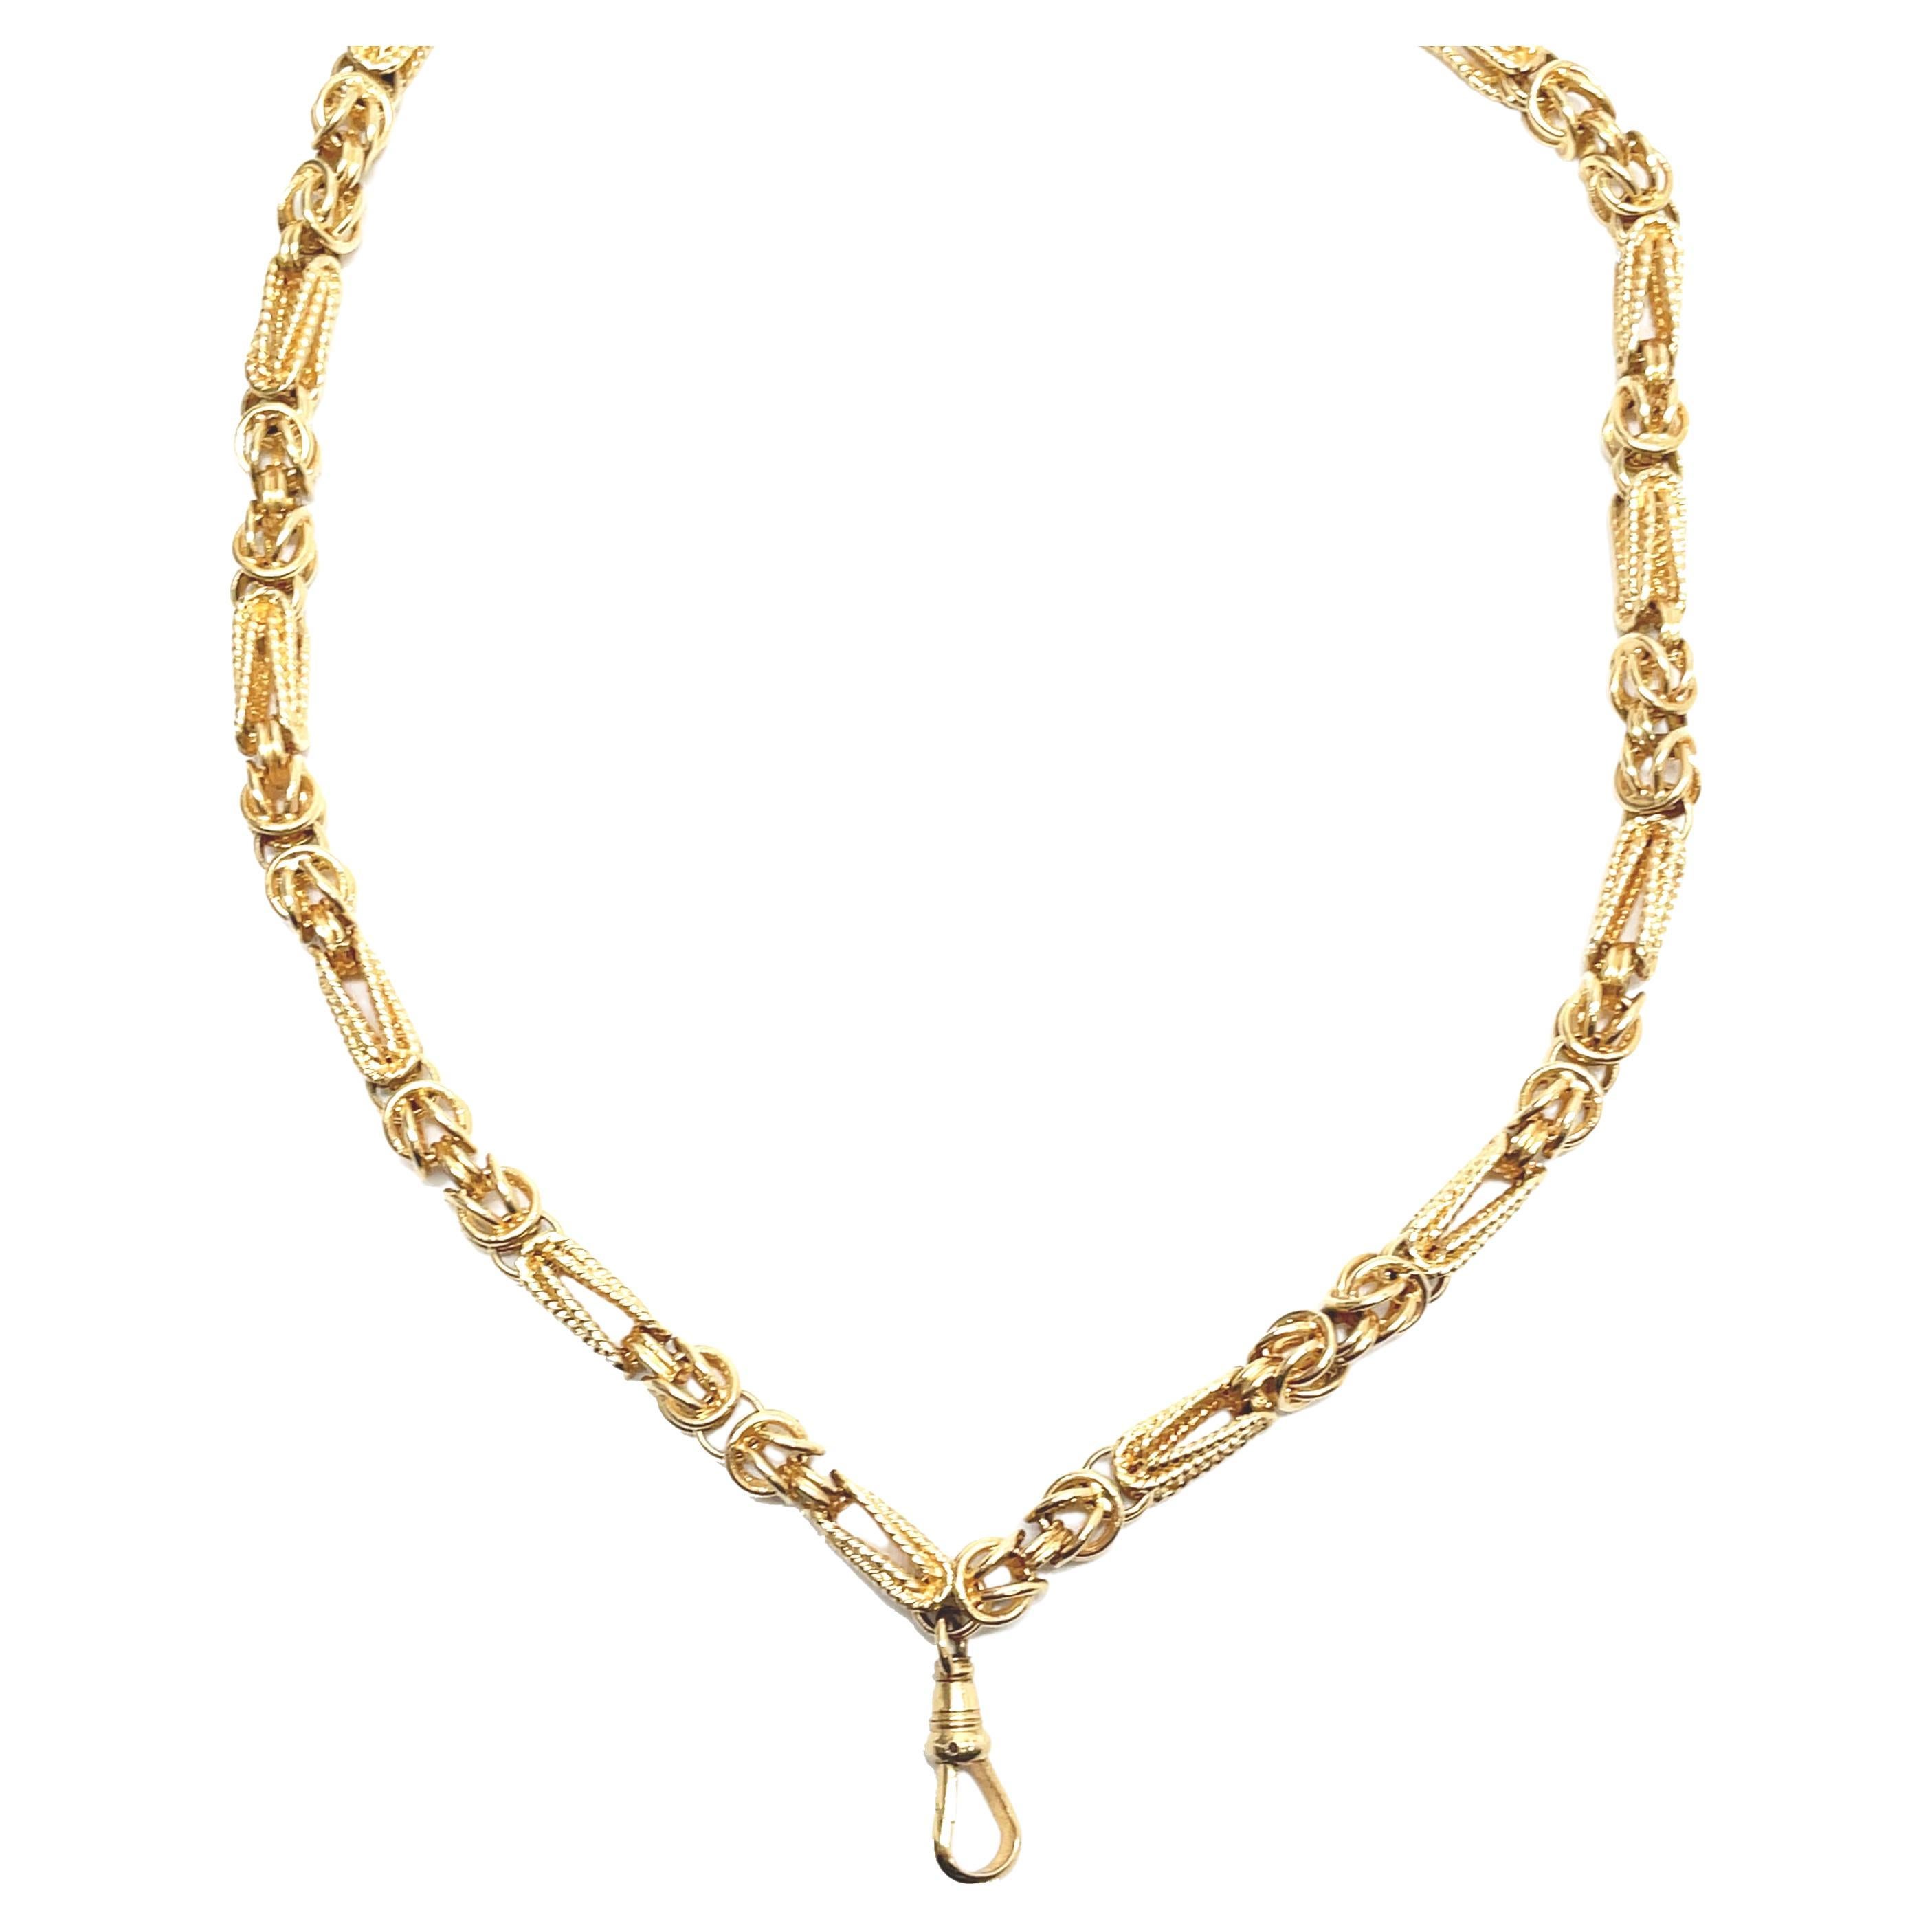 1970's Hand-Crafted Long Yellow Gold Chain